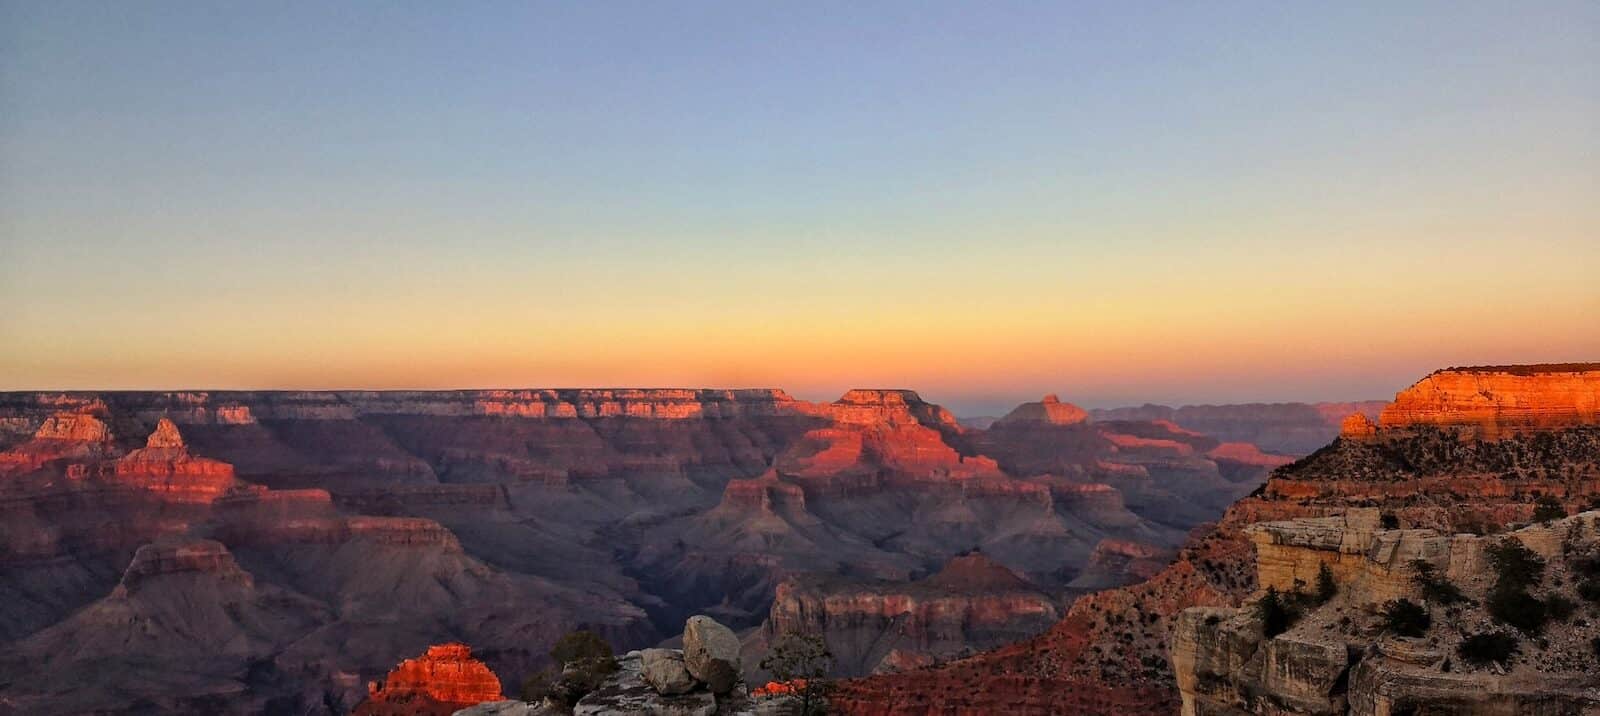 landscape of Grand canyon during sunset